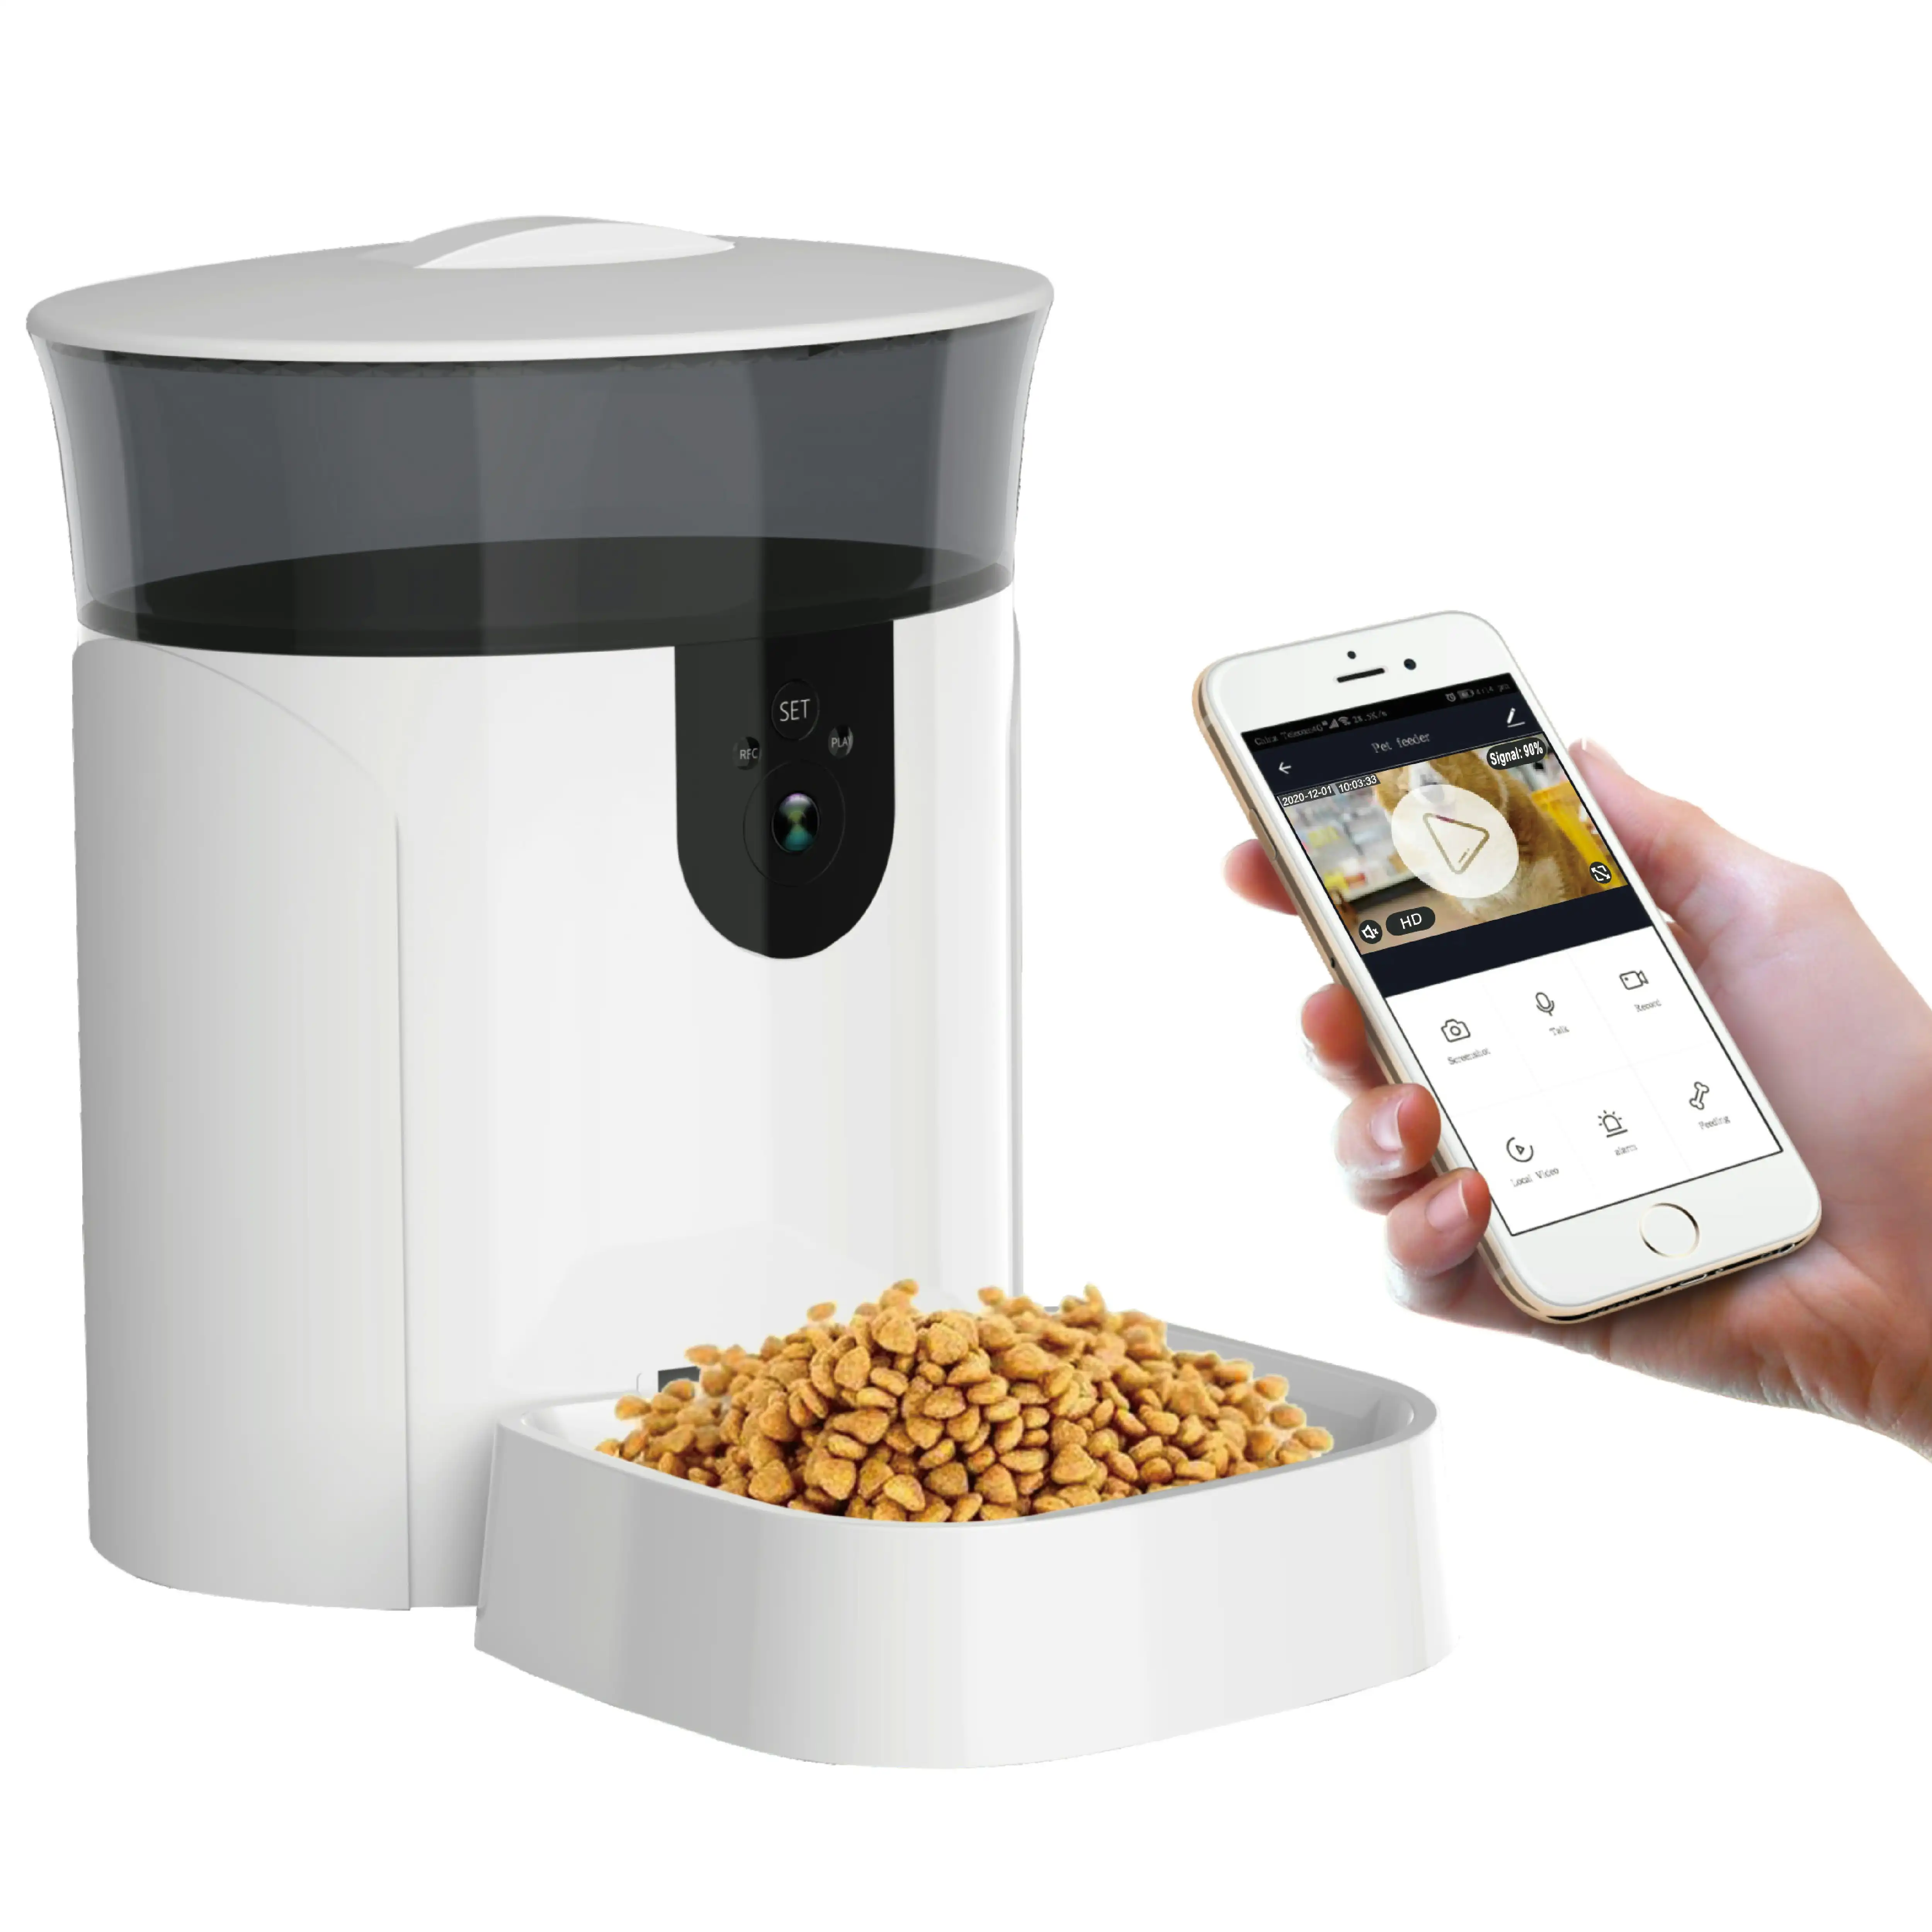 Tech 4 Pets 7L Smart Pet Feeder with Camera - Automatic or Schedule, Wifi, App